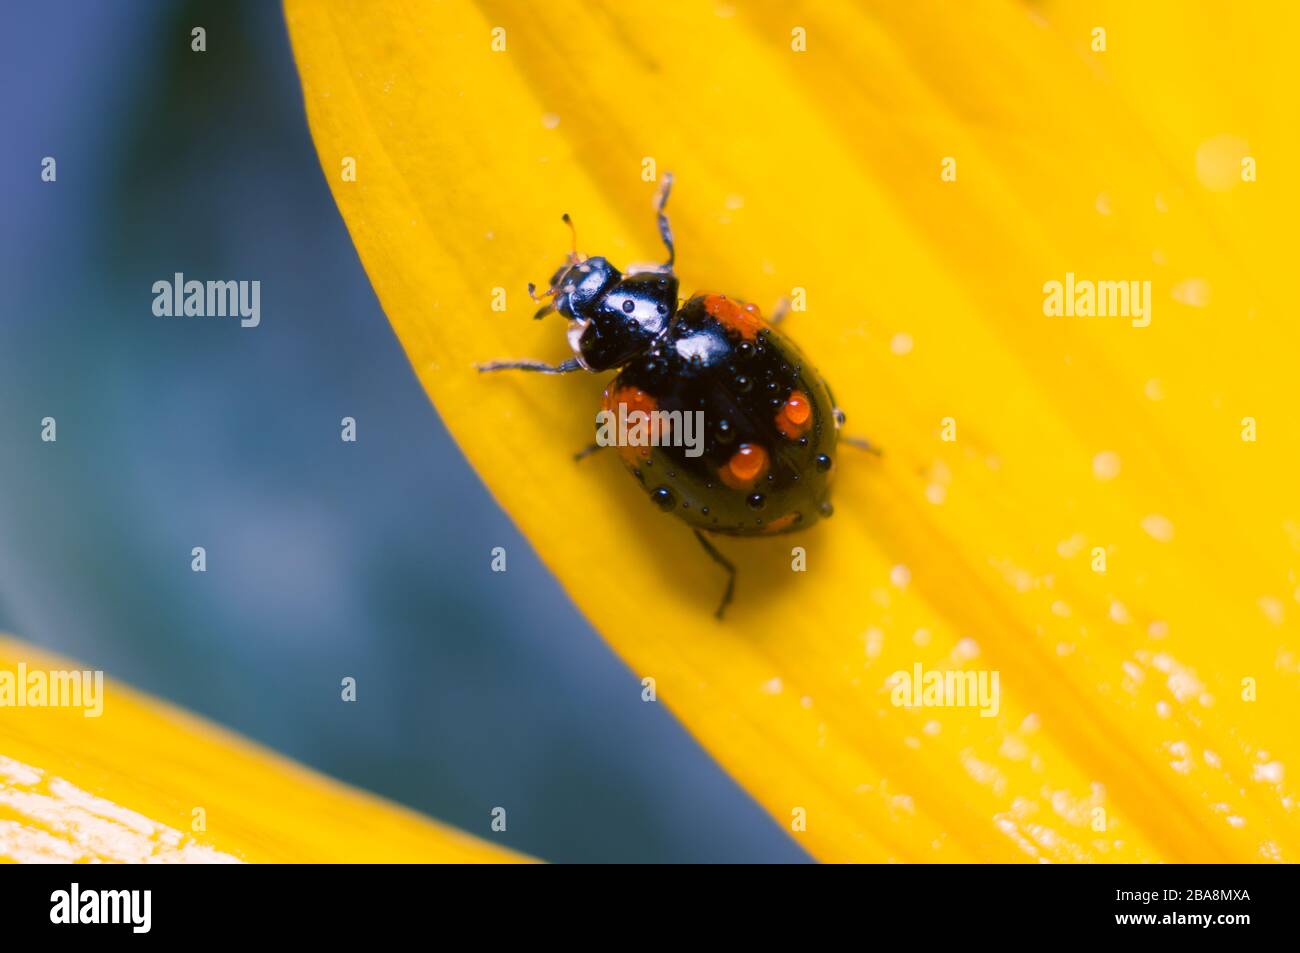 Black ladybug on the petal of a yellow flower. Soft focus, selected focus. Stock Photo